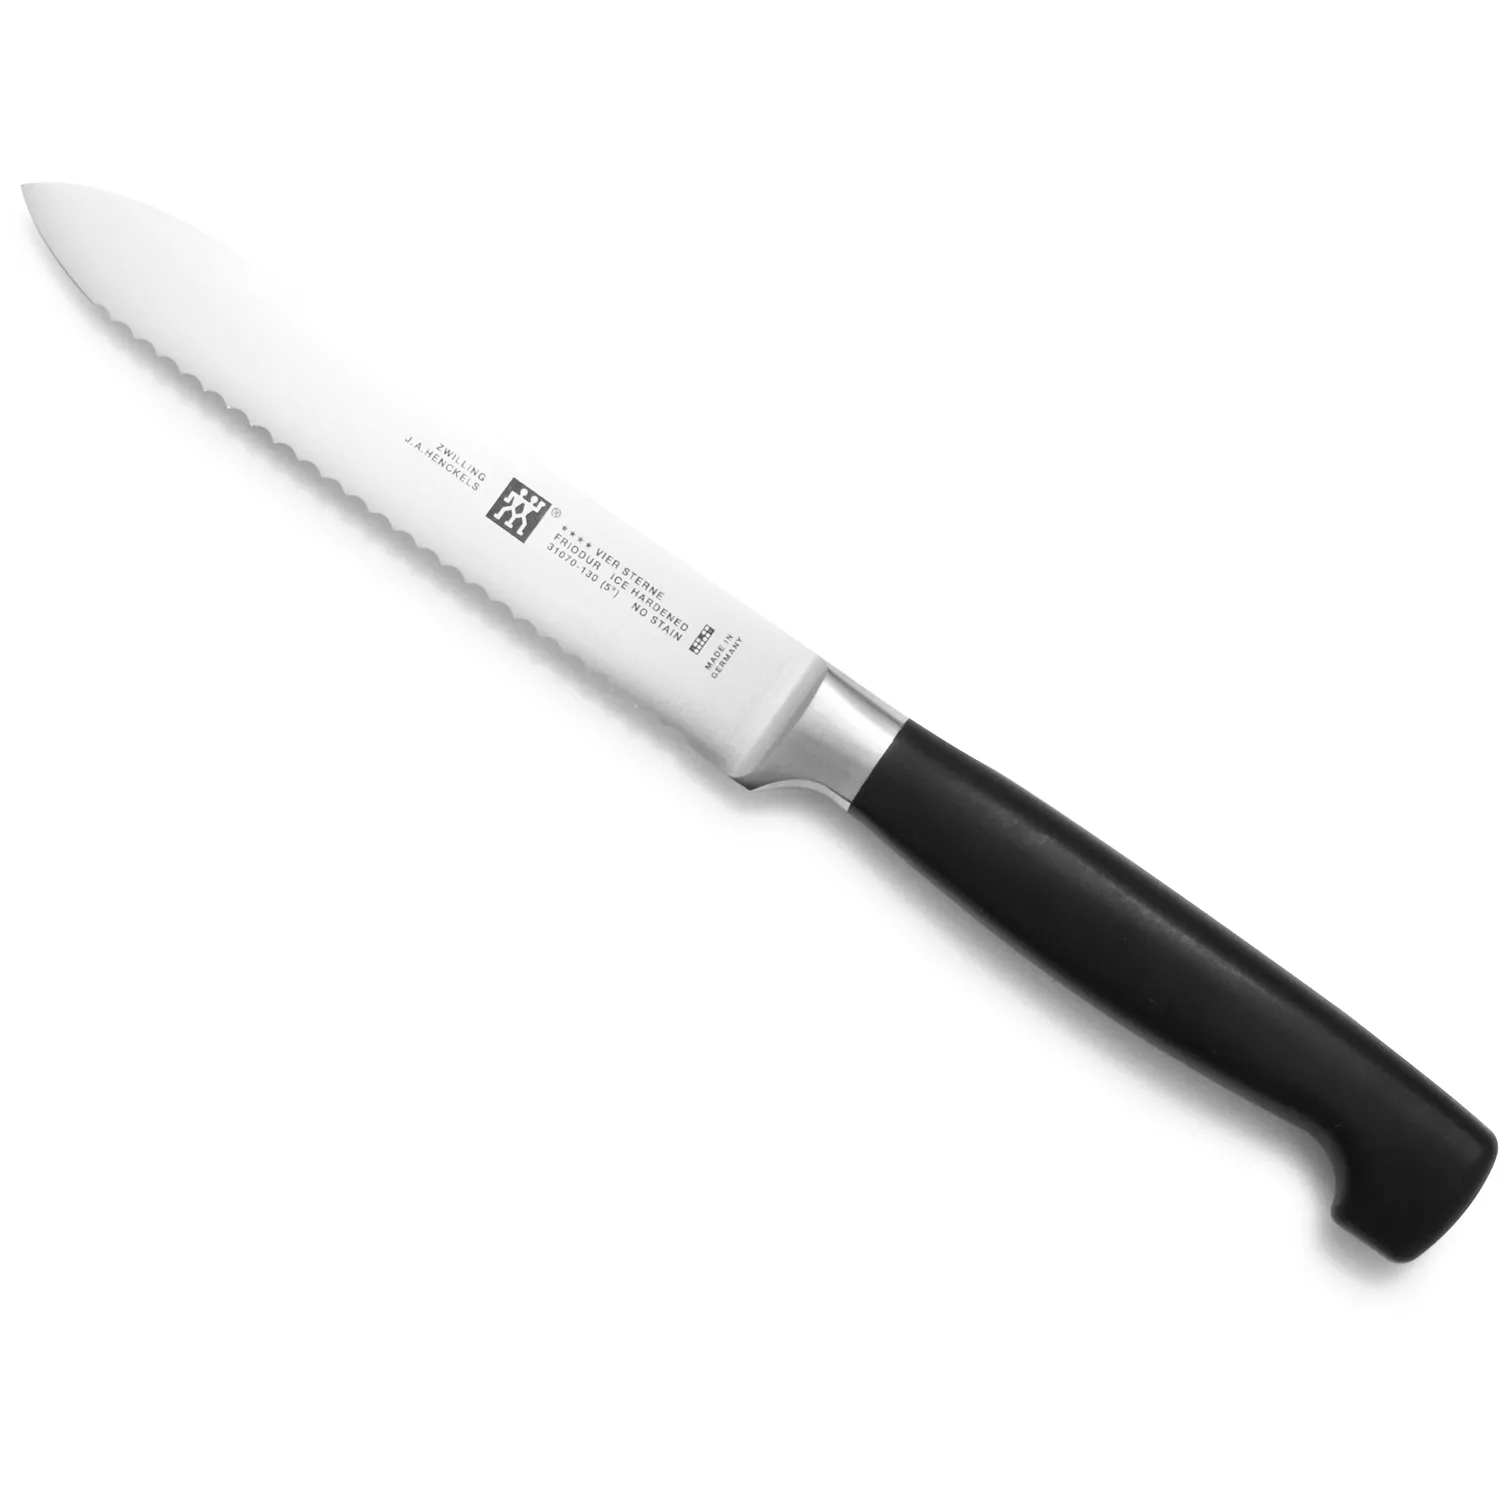 Zwilling J.A. Henckels TWIN Four Star 3 inch Paring Knife